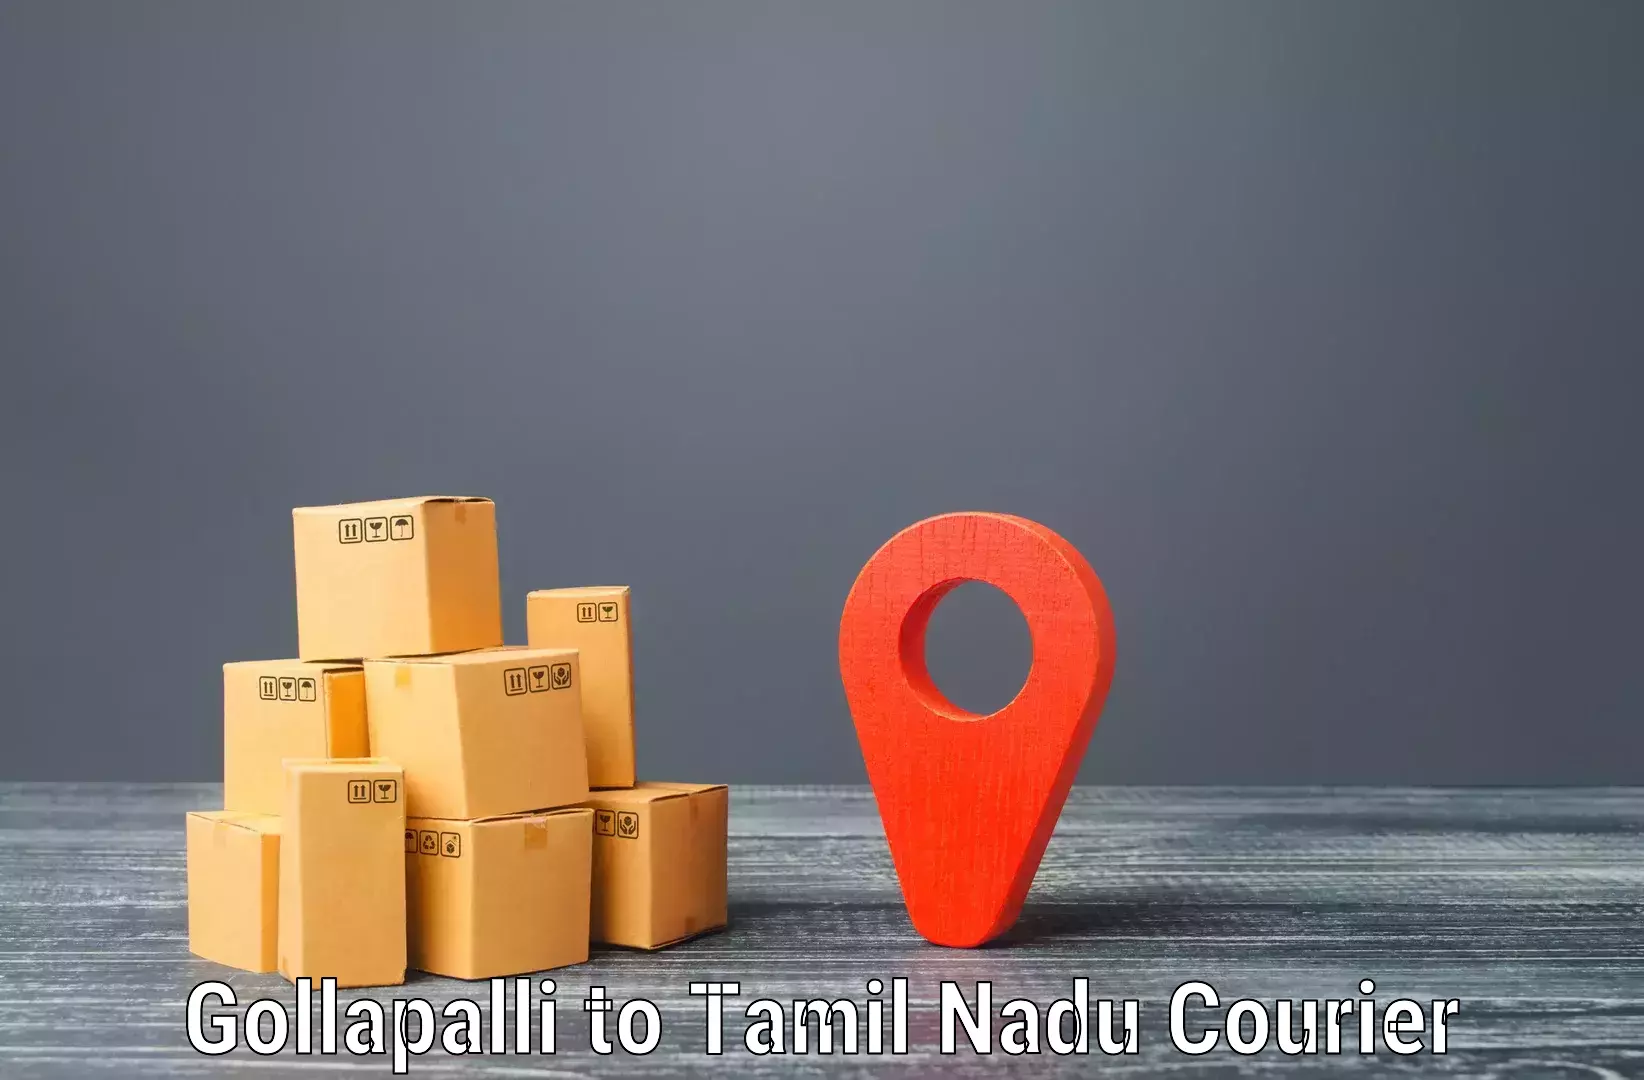 Package delivery network Gollapalli to Peralam